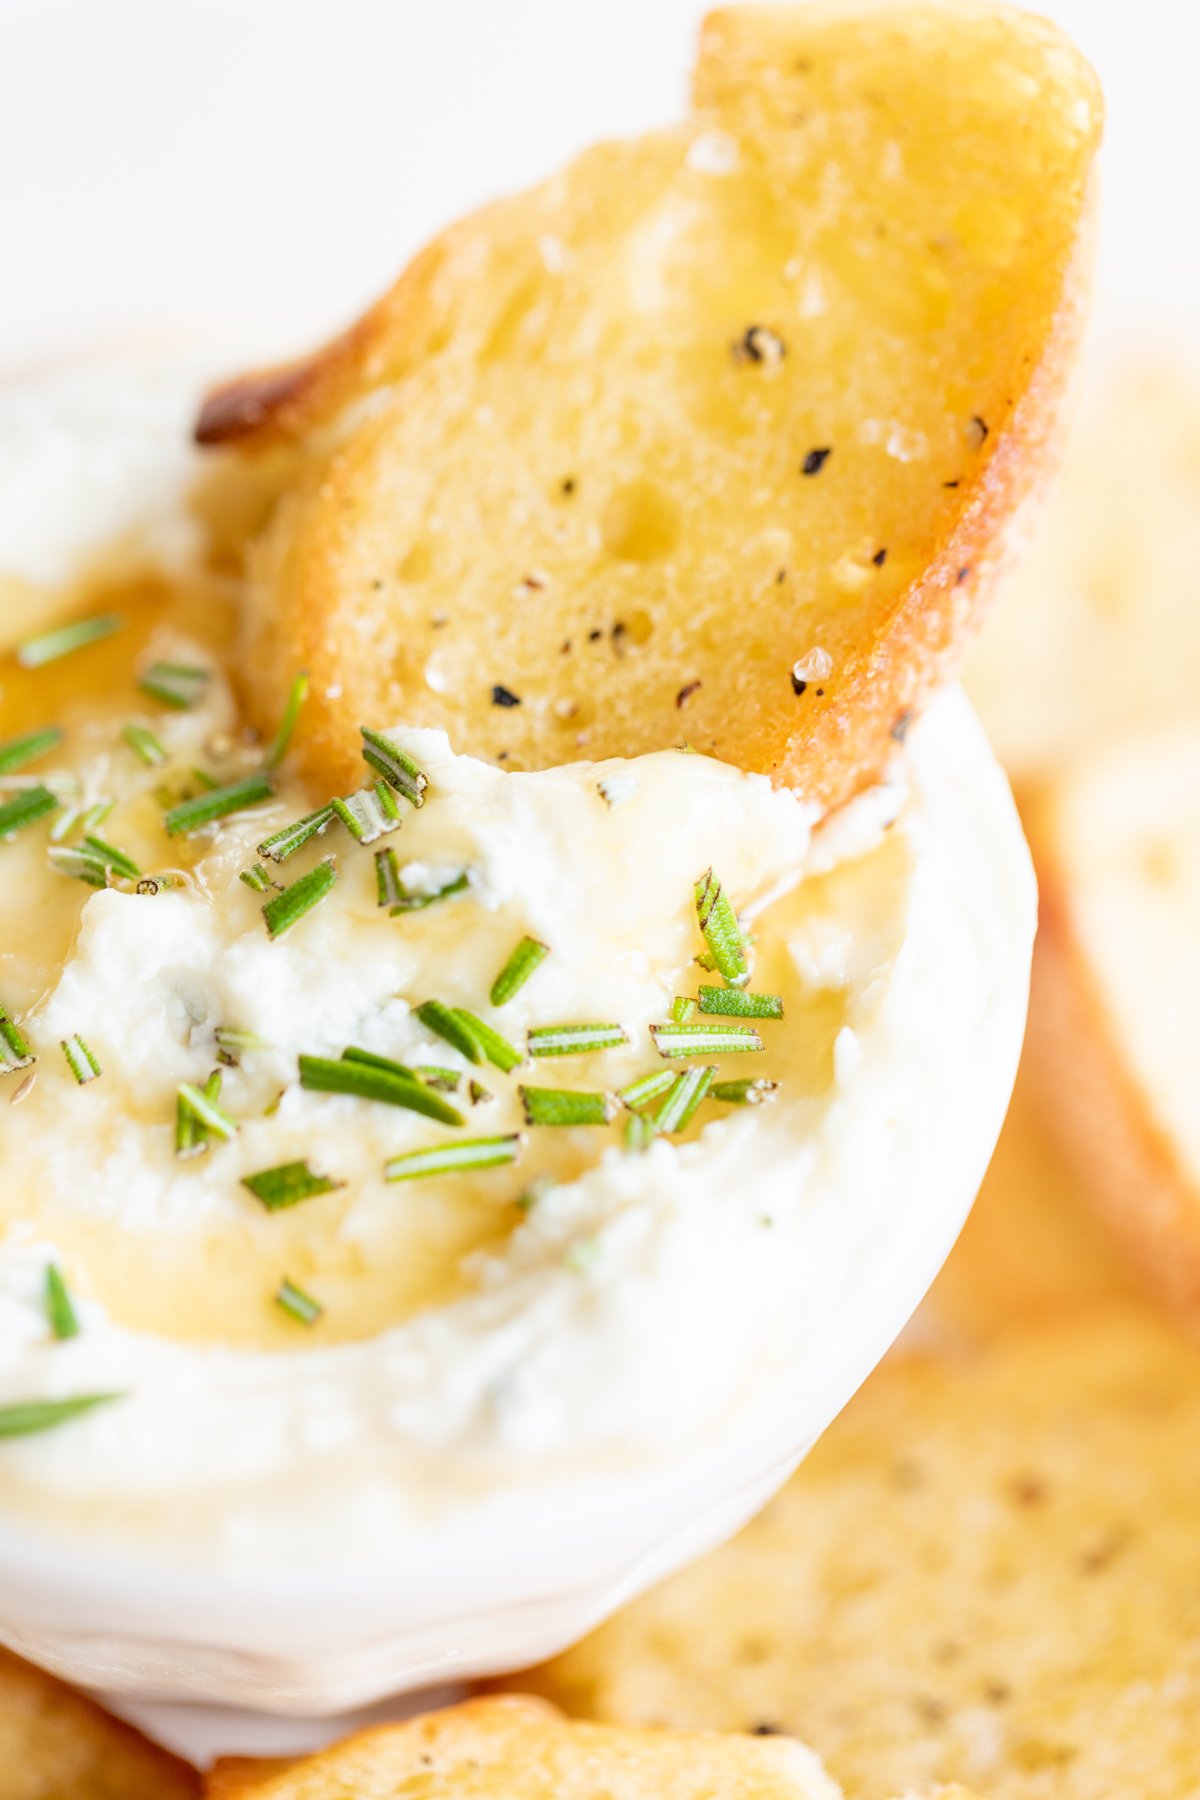 Close-up of creamy dip topped with chopped herbs and a toasted bread slice, surrounded by crostini for the perfect appetizer spread.